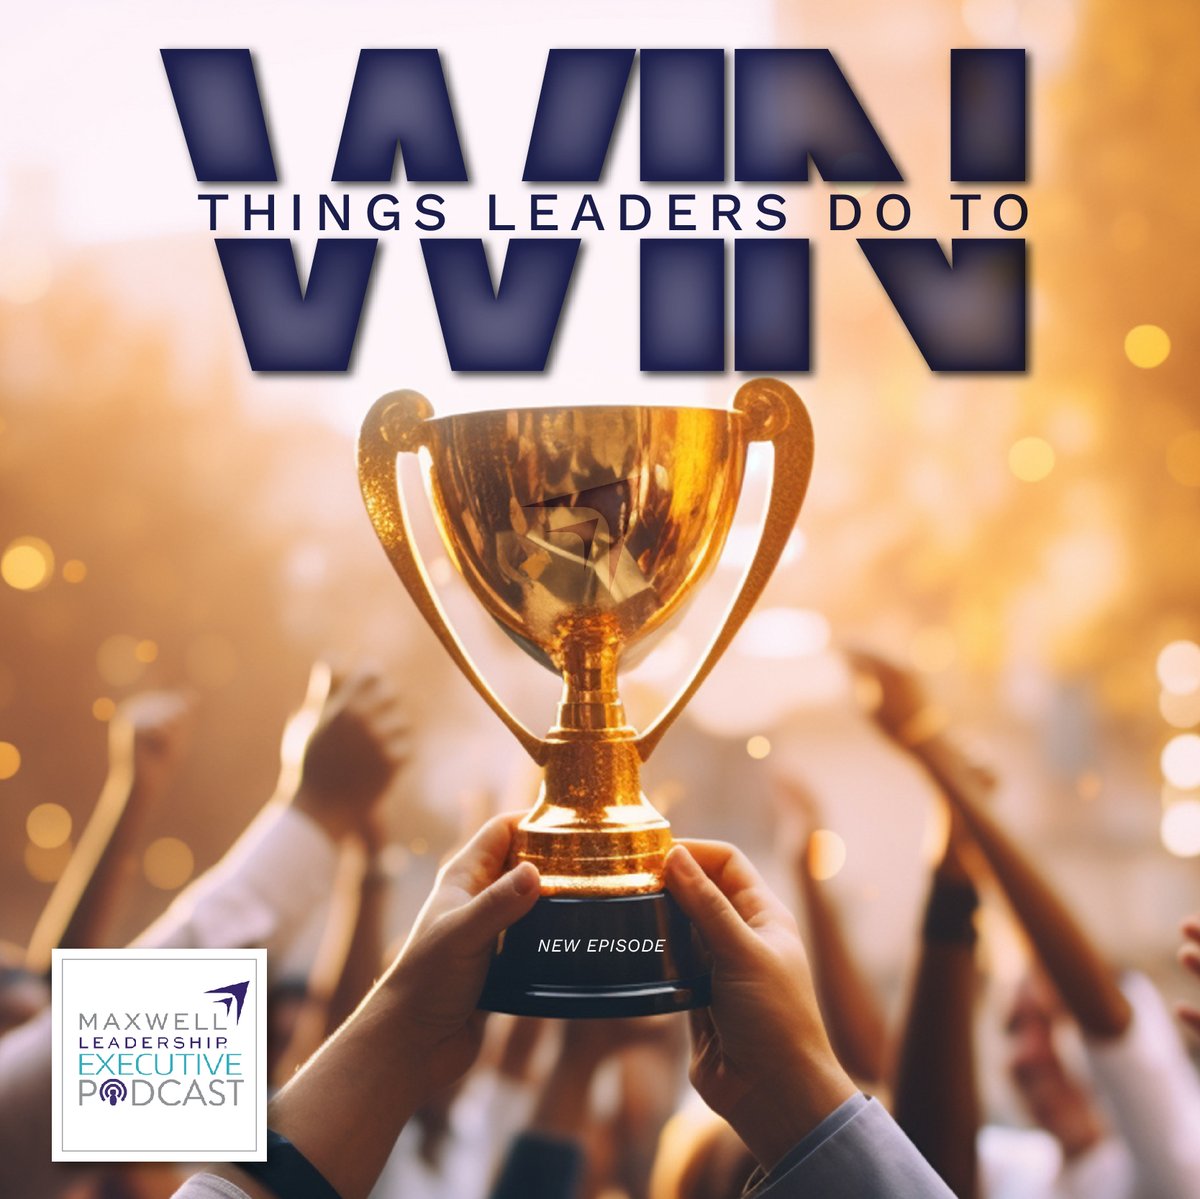 Tune in to this episode of #MaxwellLeadershipExecutivePodcast on essential leadership strategies for victory! Discover keys to unity, diversity, and team development! 🏆 bit.ly/49YGRX3 #TeamDevelopment #LeadershipDevelopment #EverybodyWins